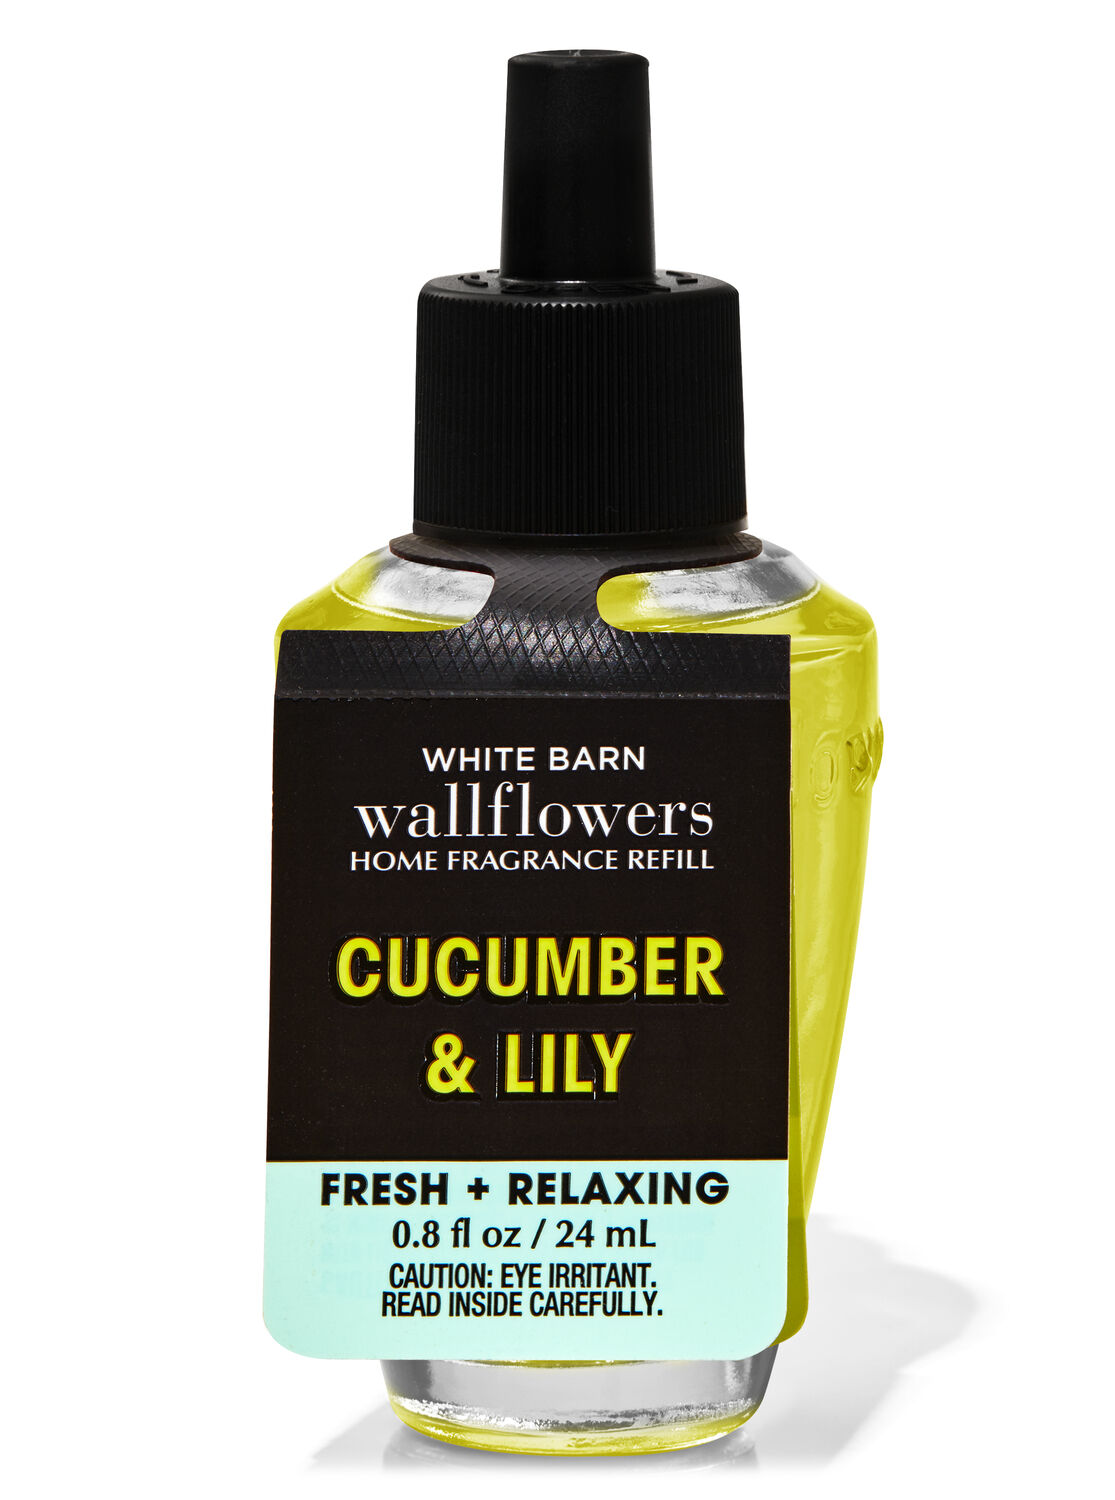 Cucumber & Lily Wallflowers Fragrance Refill